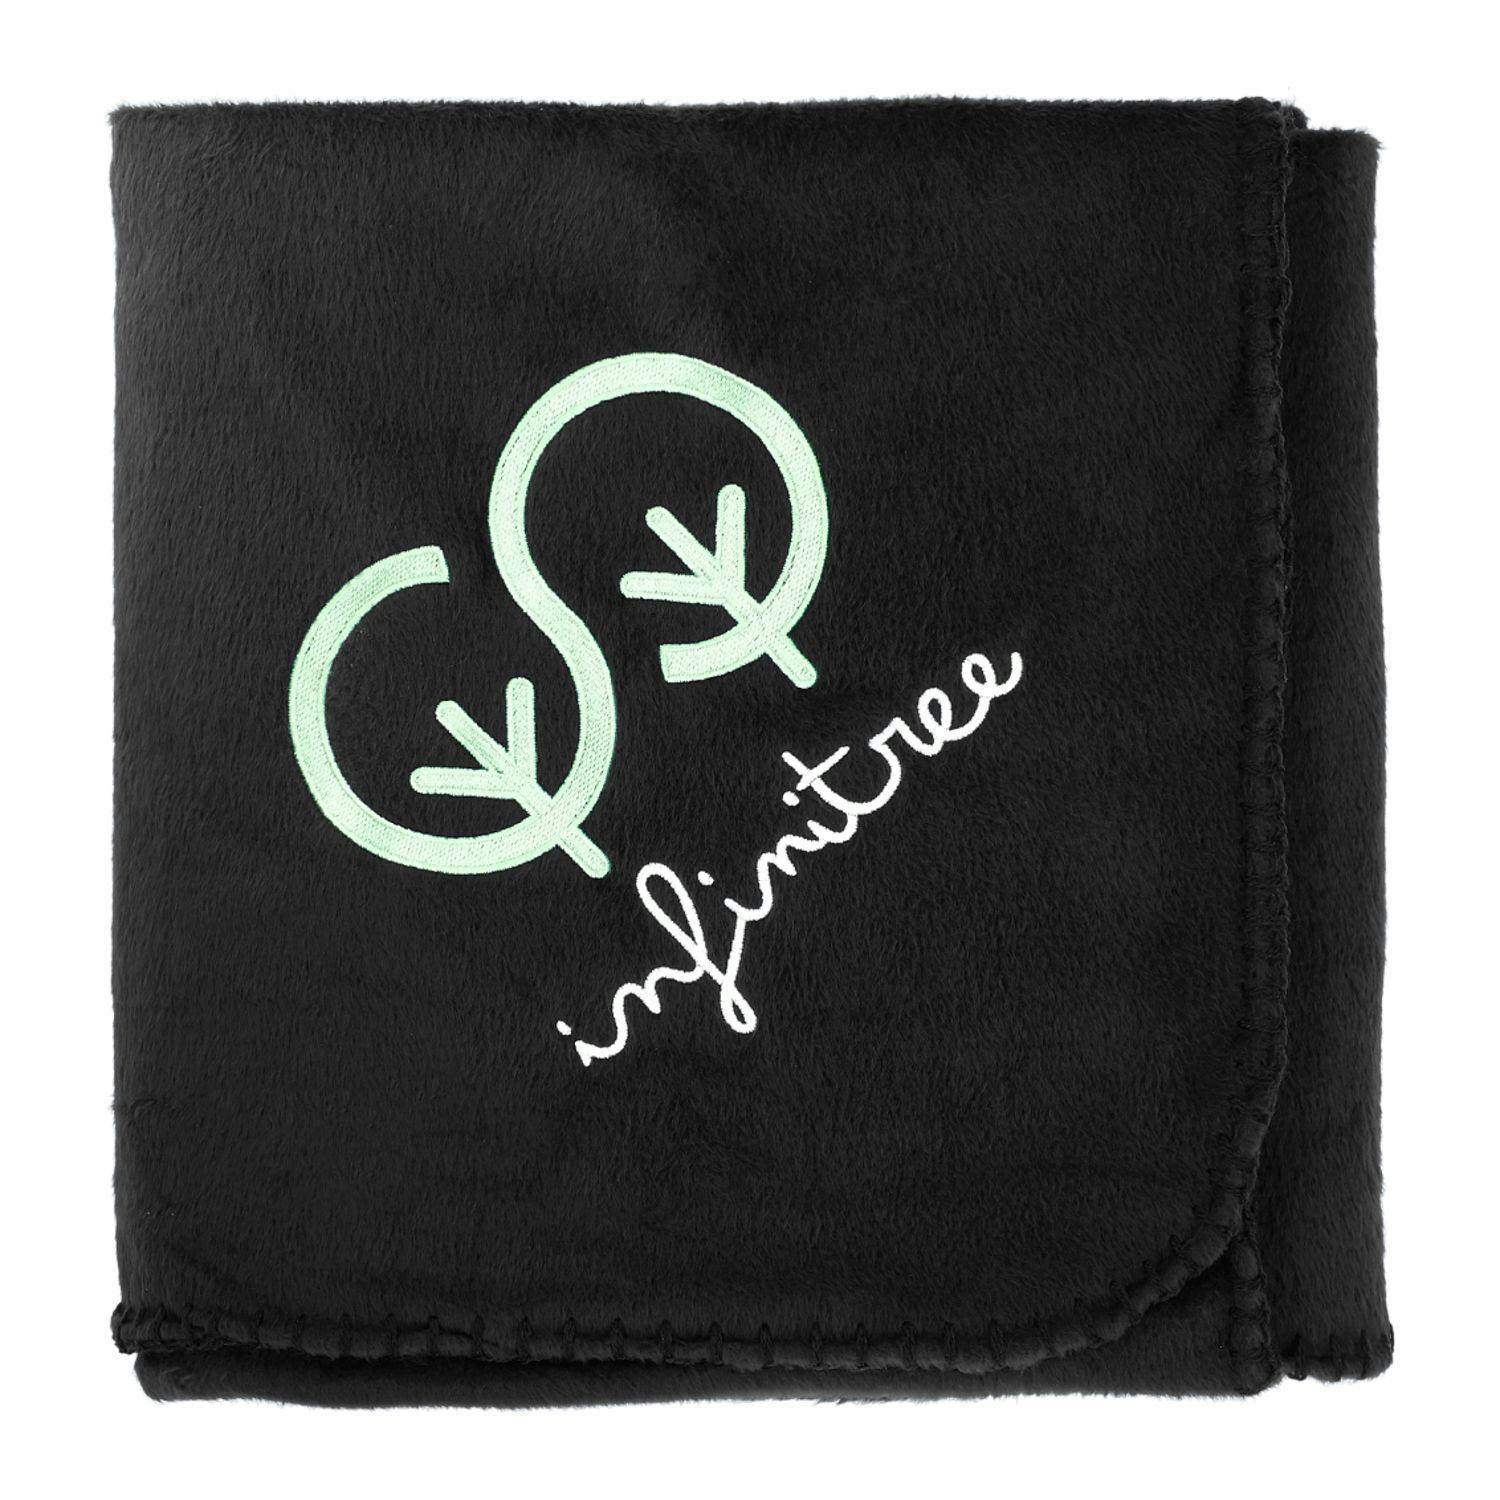 100% Recycled PET Fleece Blanket with RPET Pouch - additional Image 2